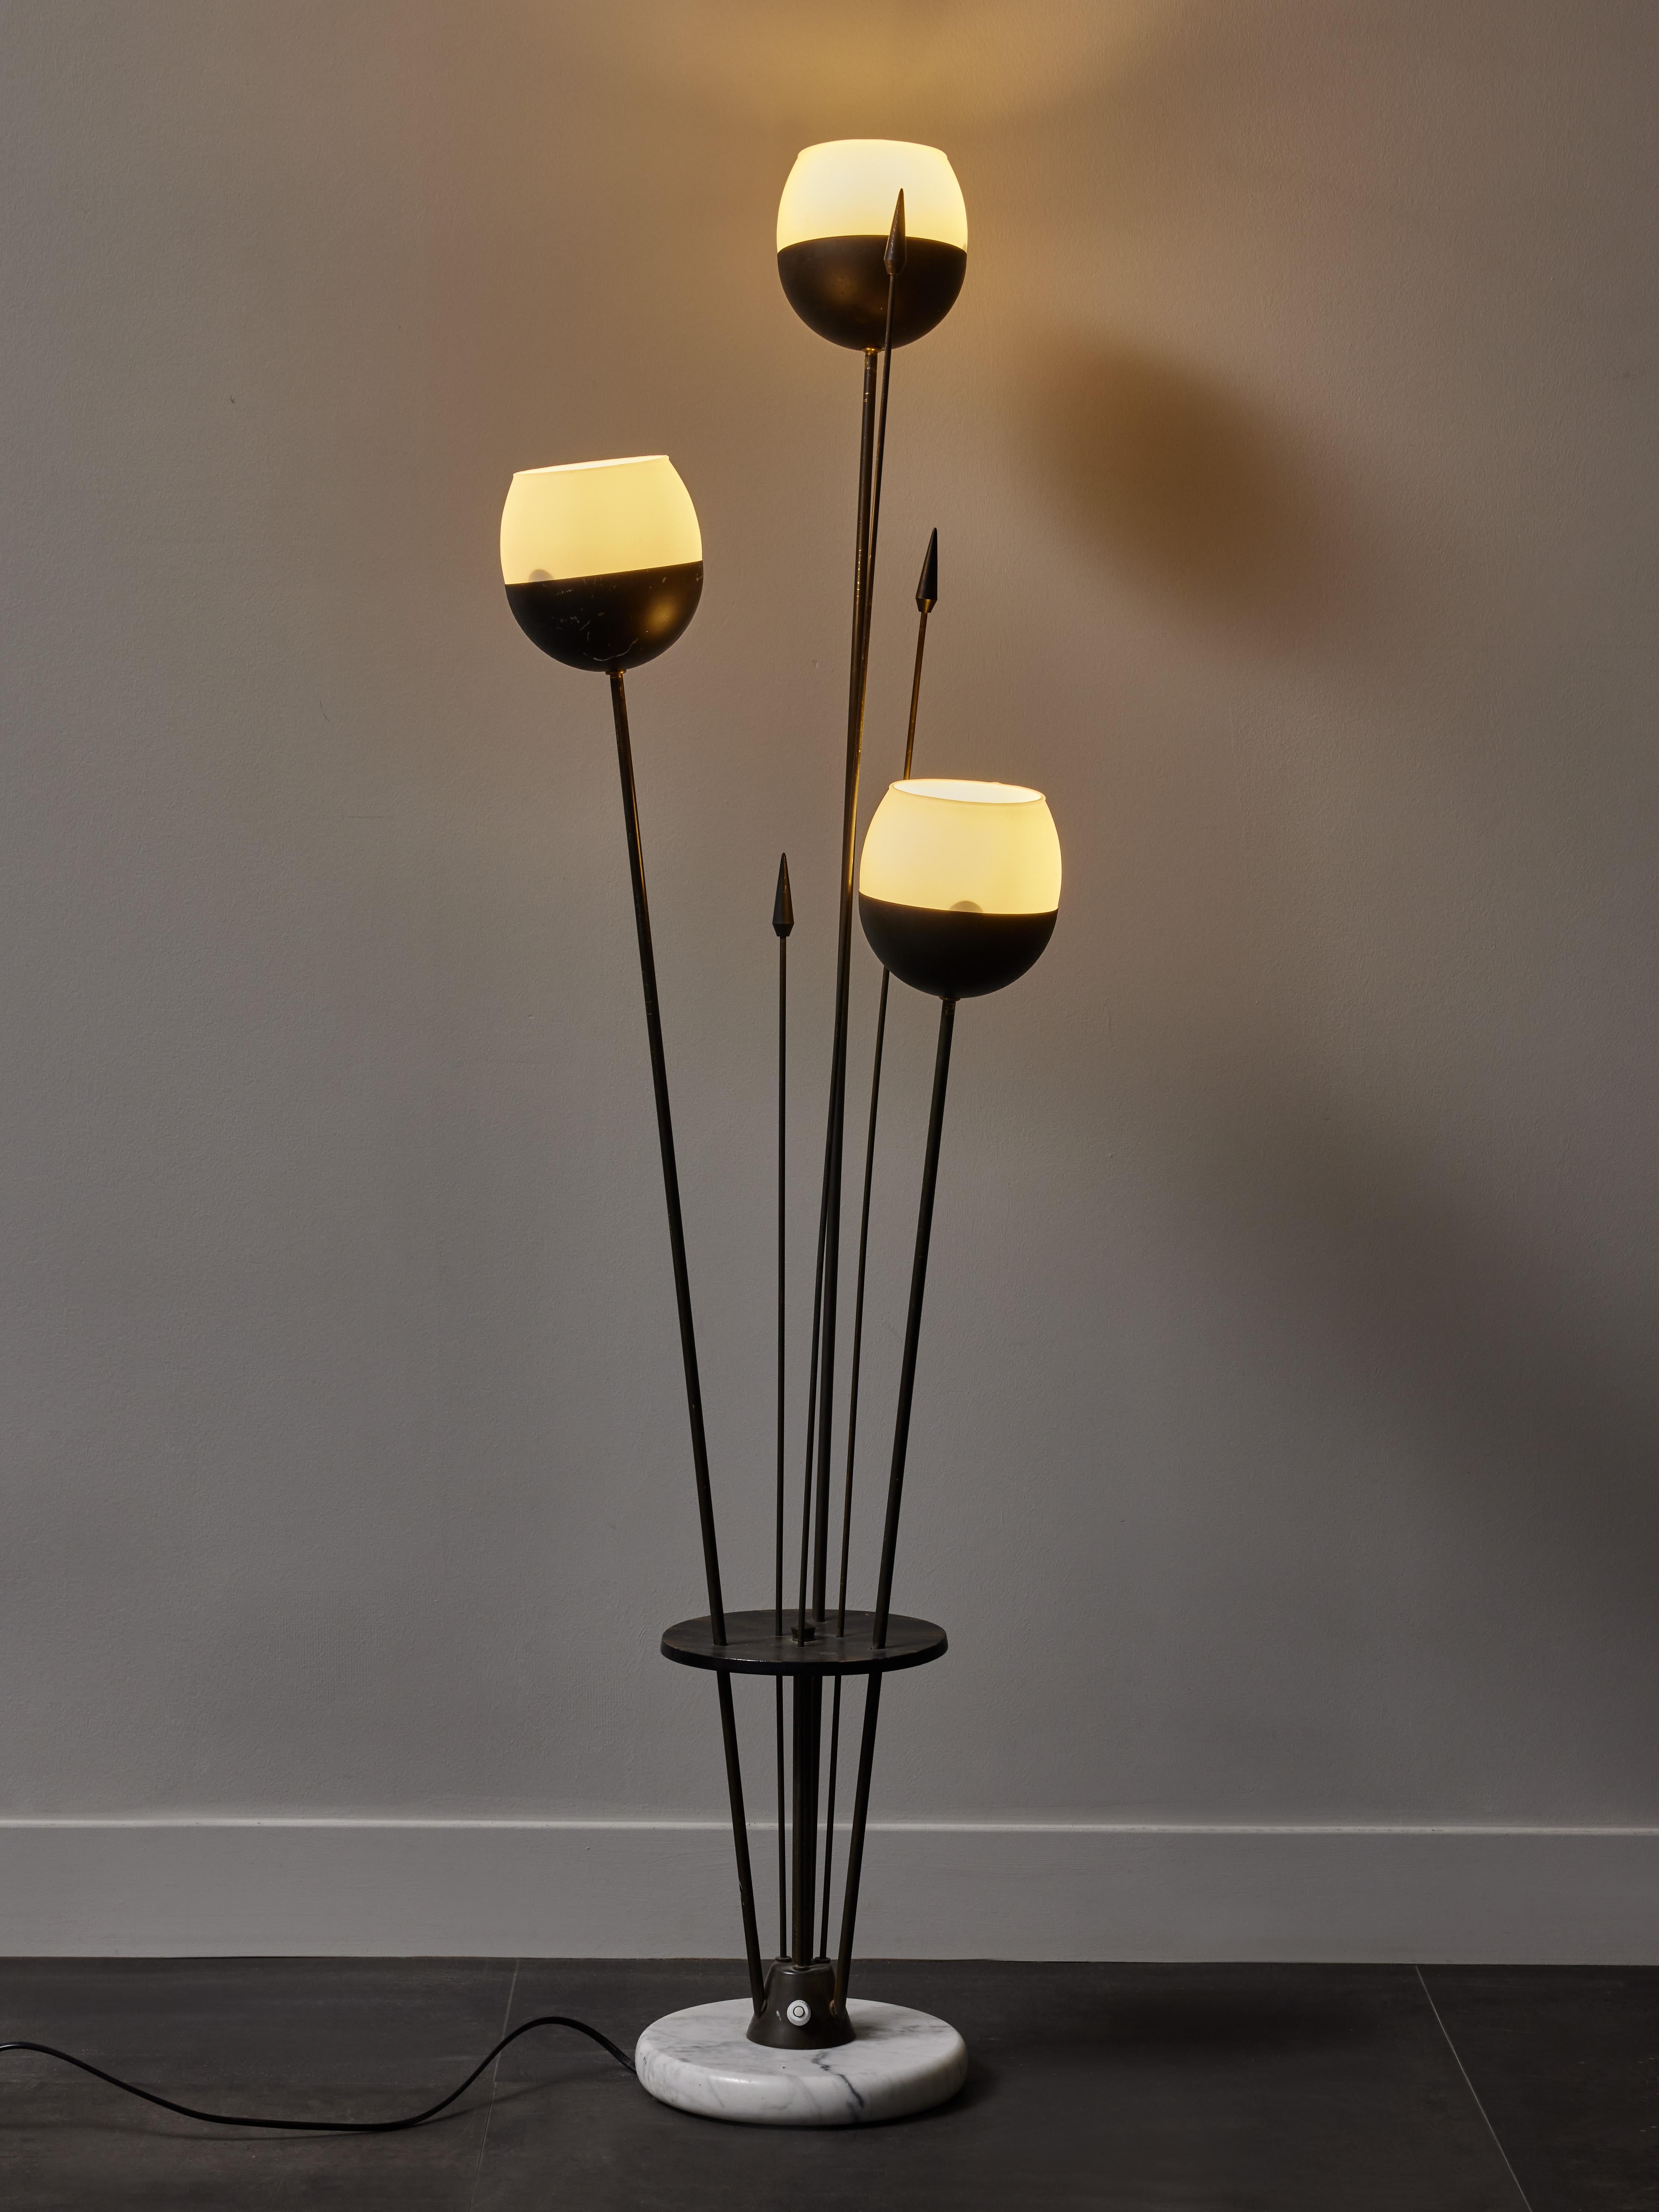 Small floor lamp made of a round marble base, three arms of light of different height topped with half globes opaline glasses, and metal decorative spears.